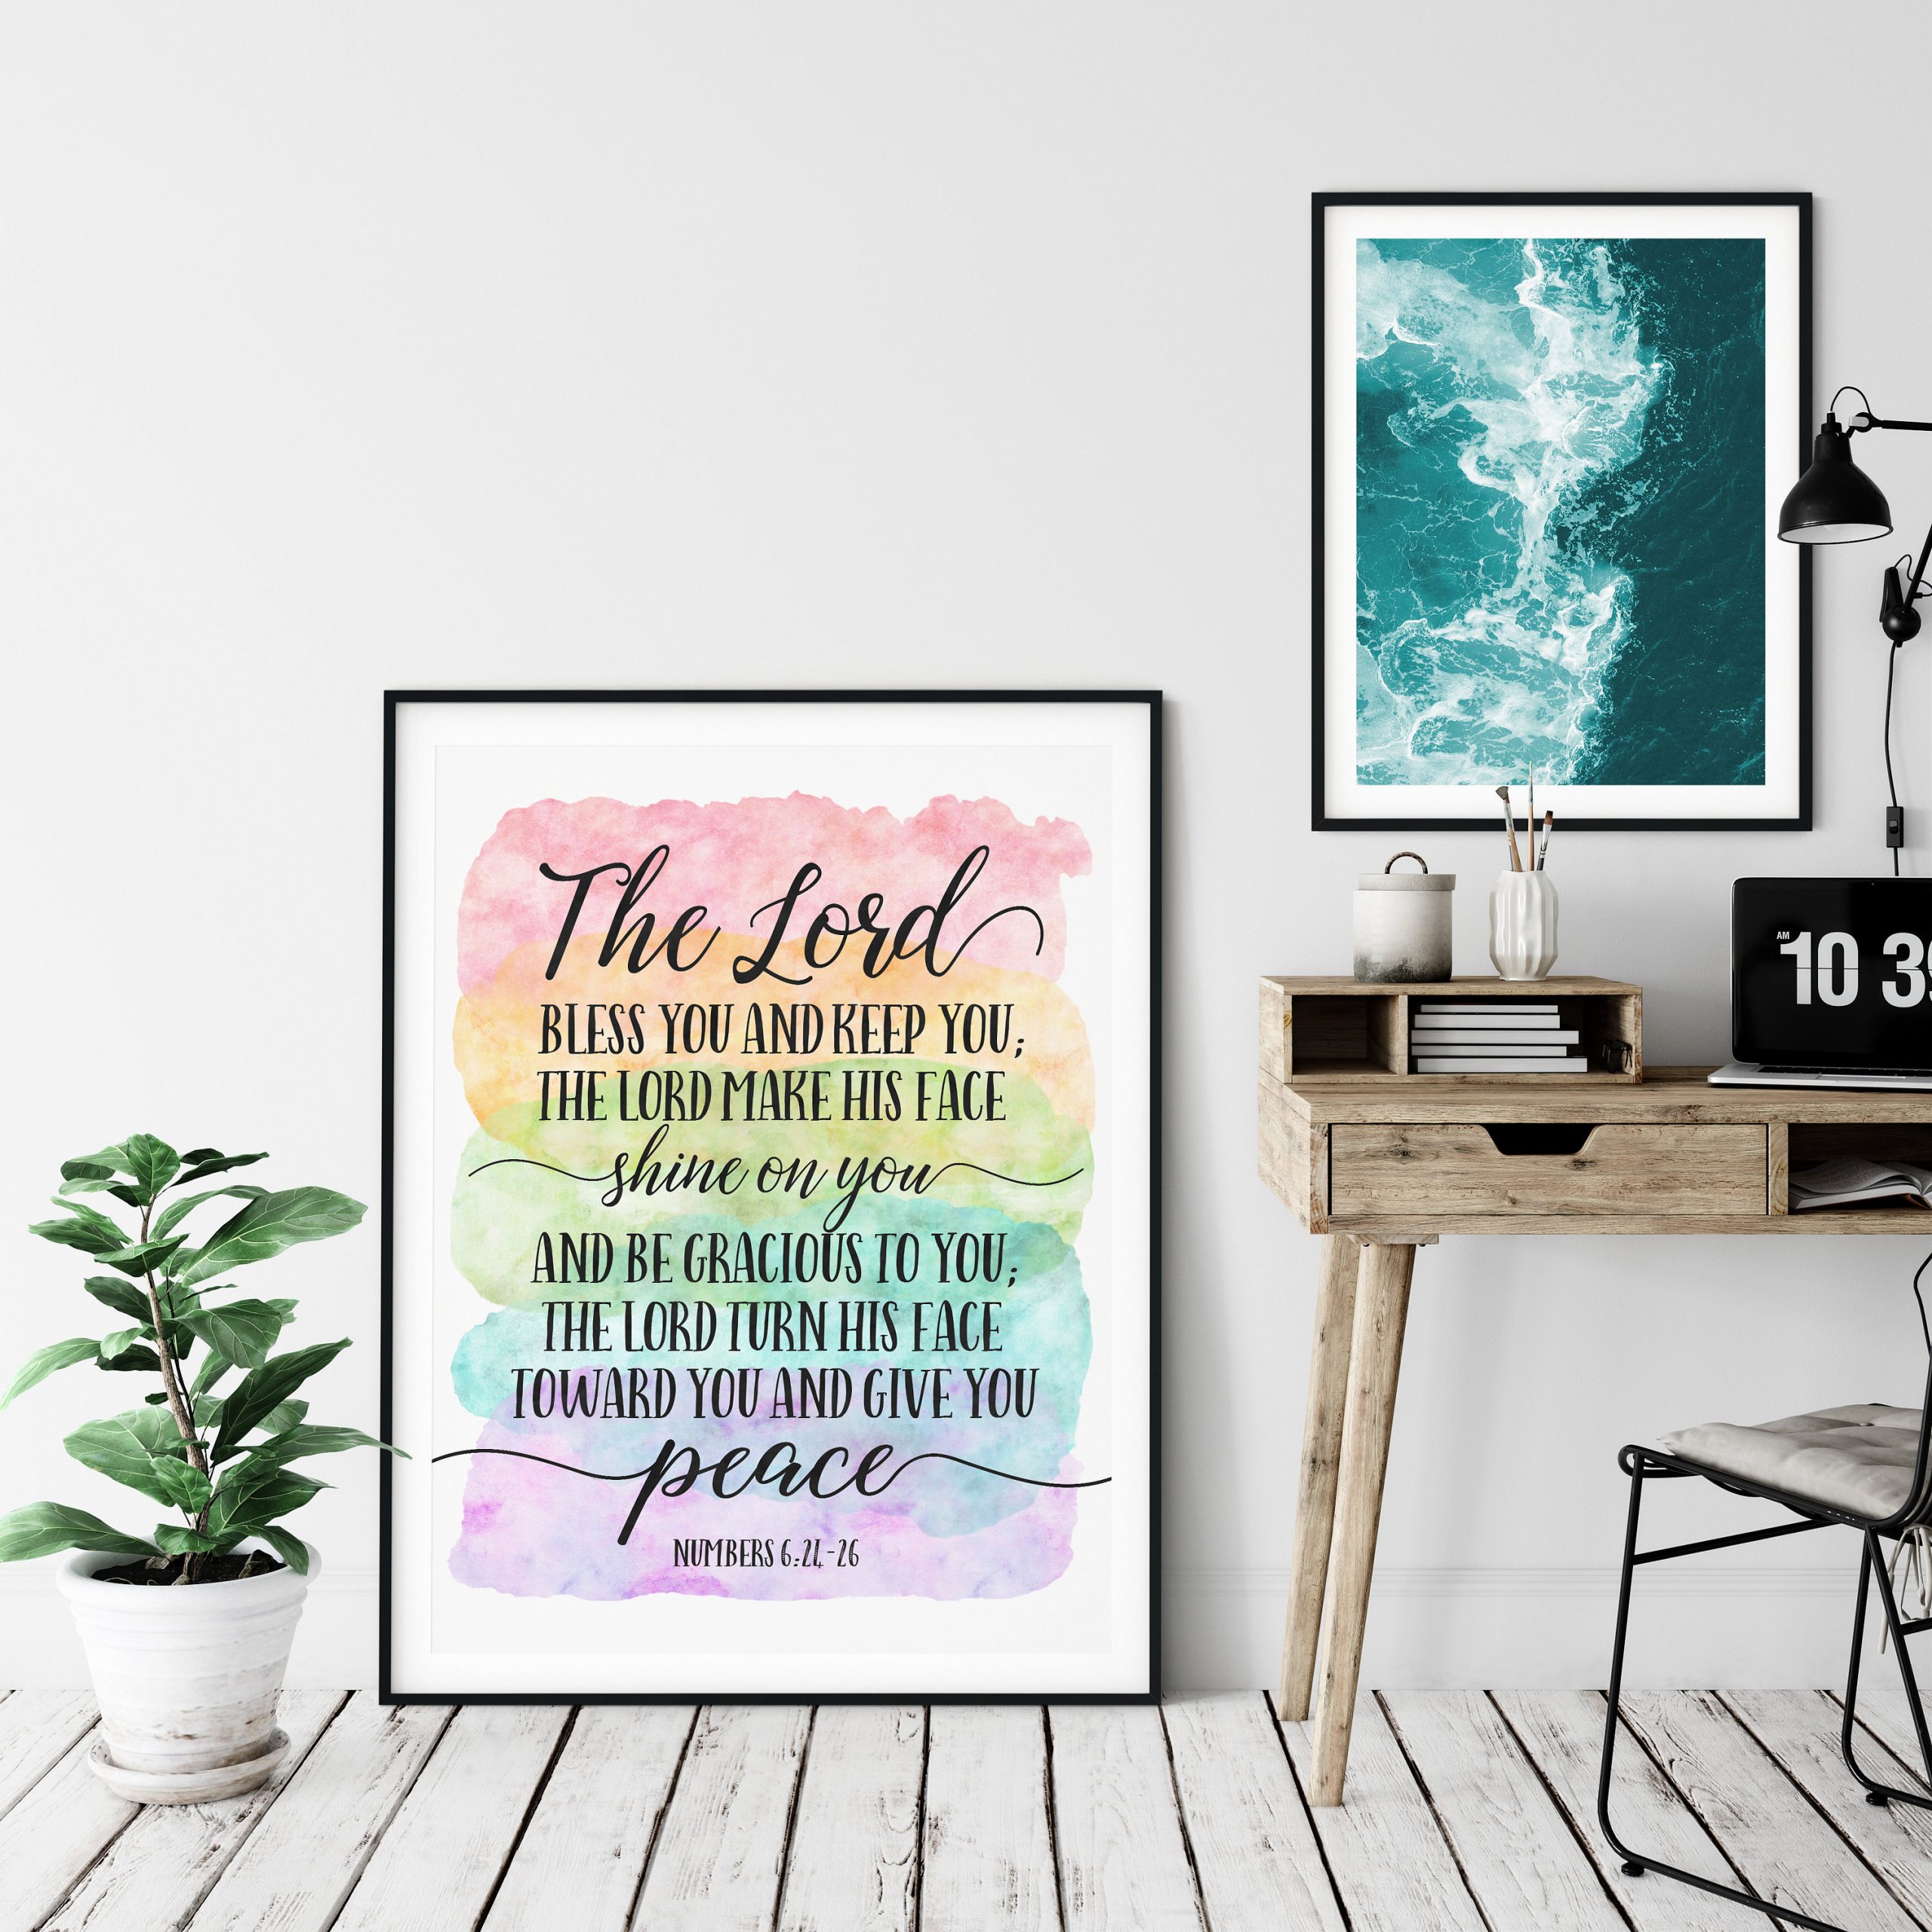 The Lord Bless You And Keep You, Numbers 6:24, Bible Verse Printable Wall Art,Nursery Decor